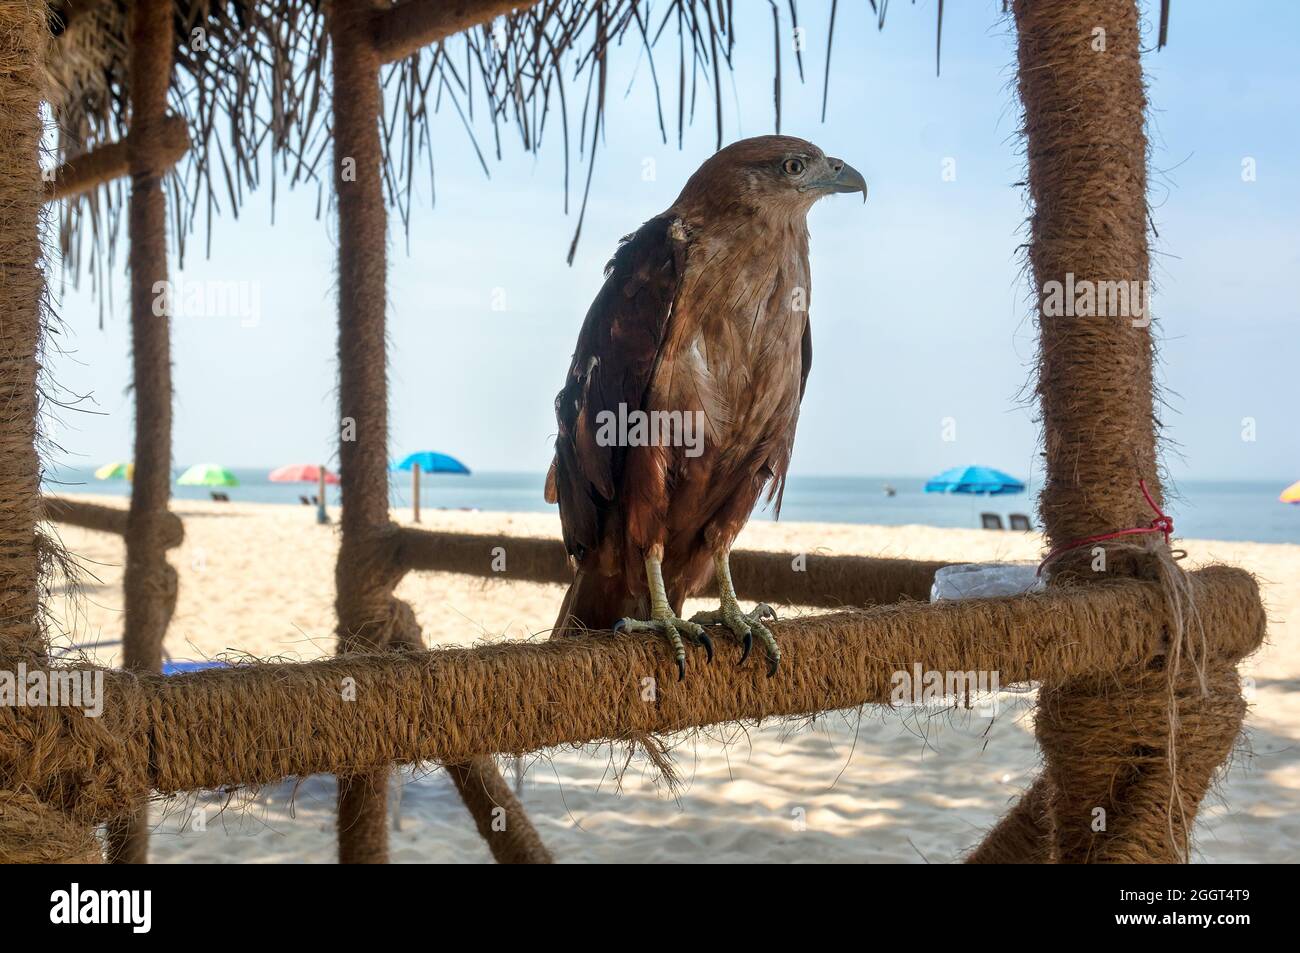 evil beautiful majestic eagle on a background of the beach under blue sky Stock Photo